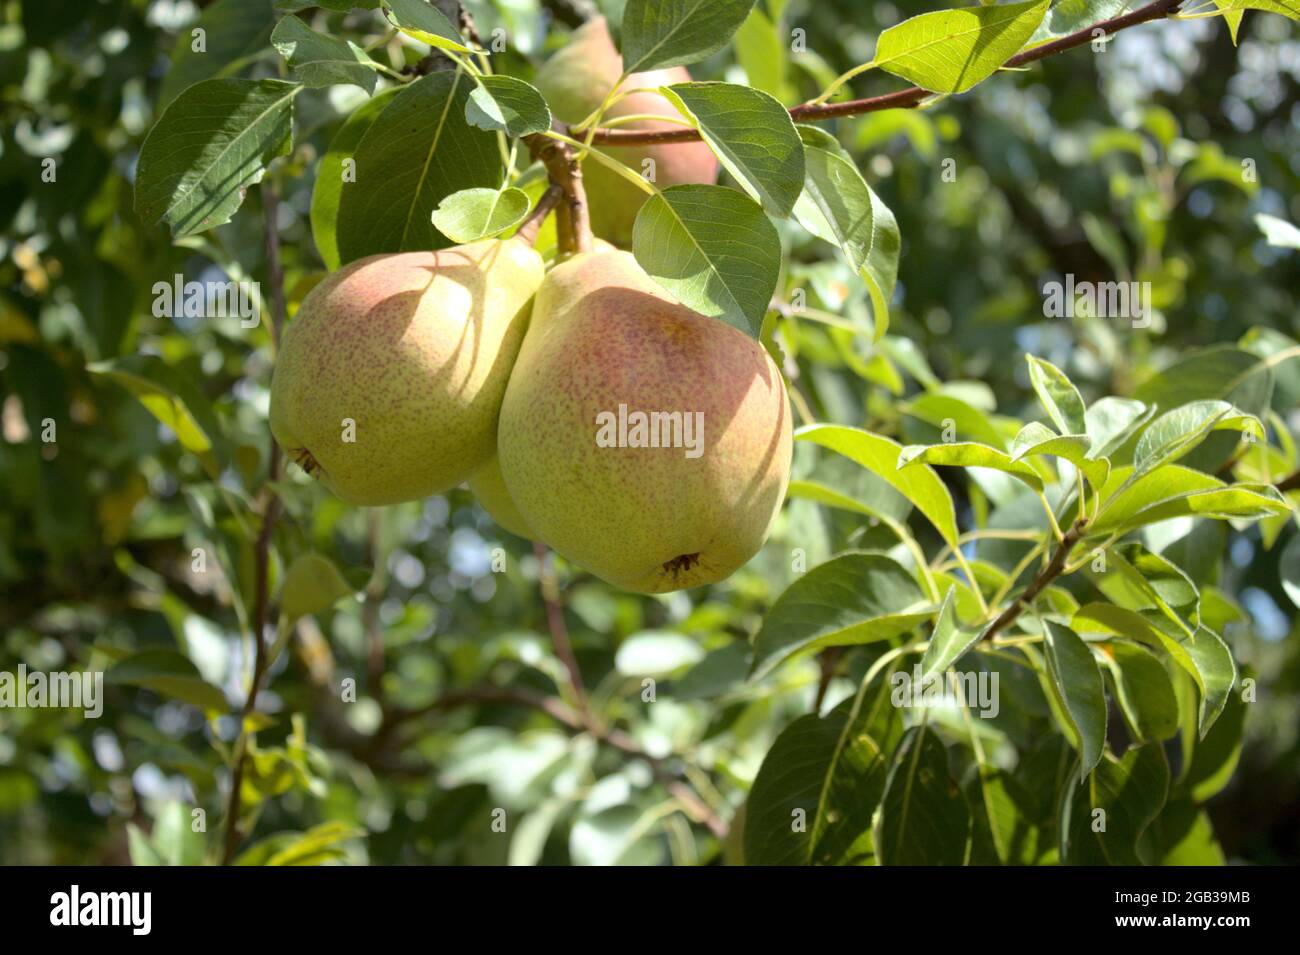 Gellerts butter pears on a pear tree Stock Photo